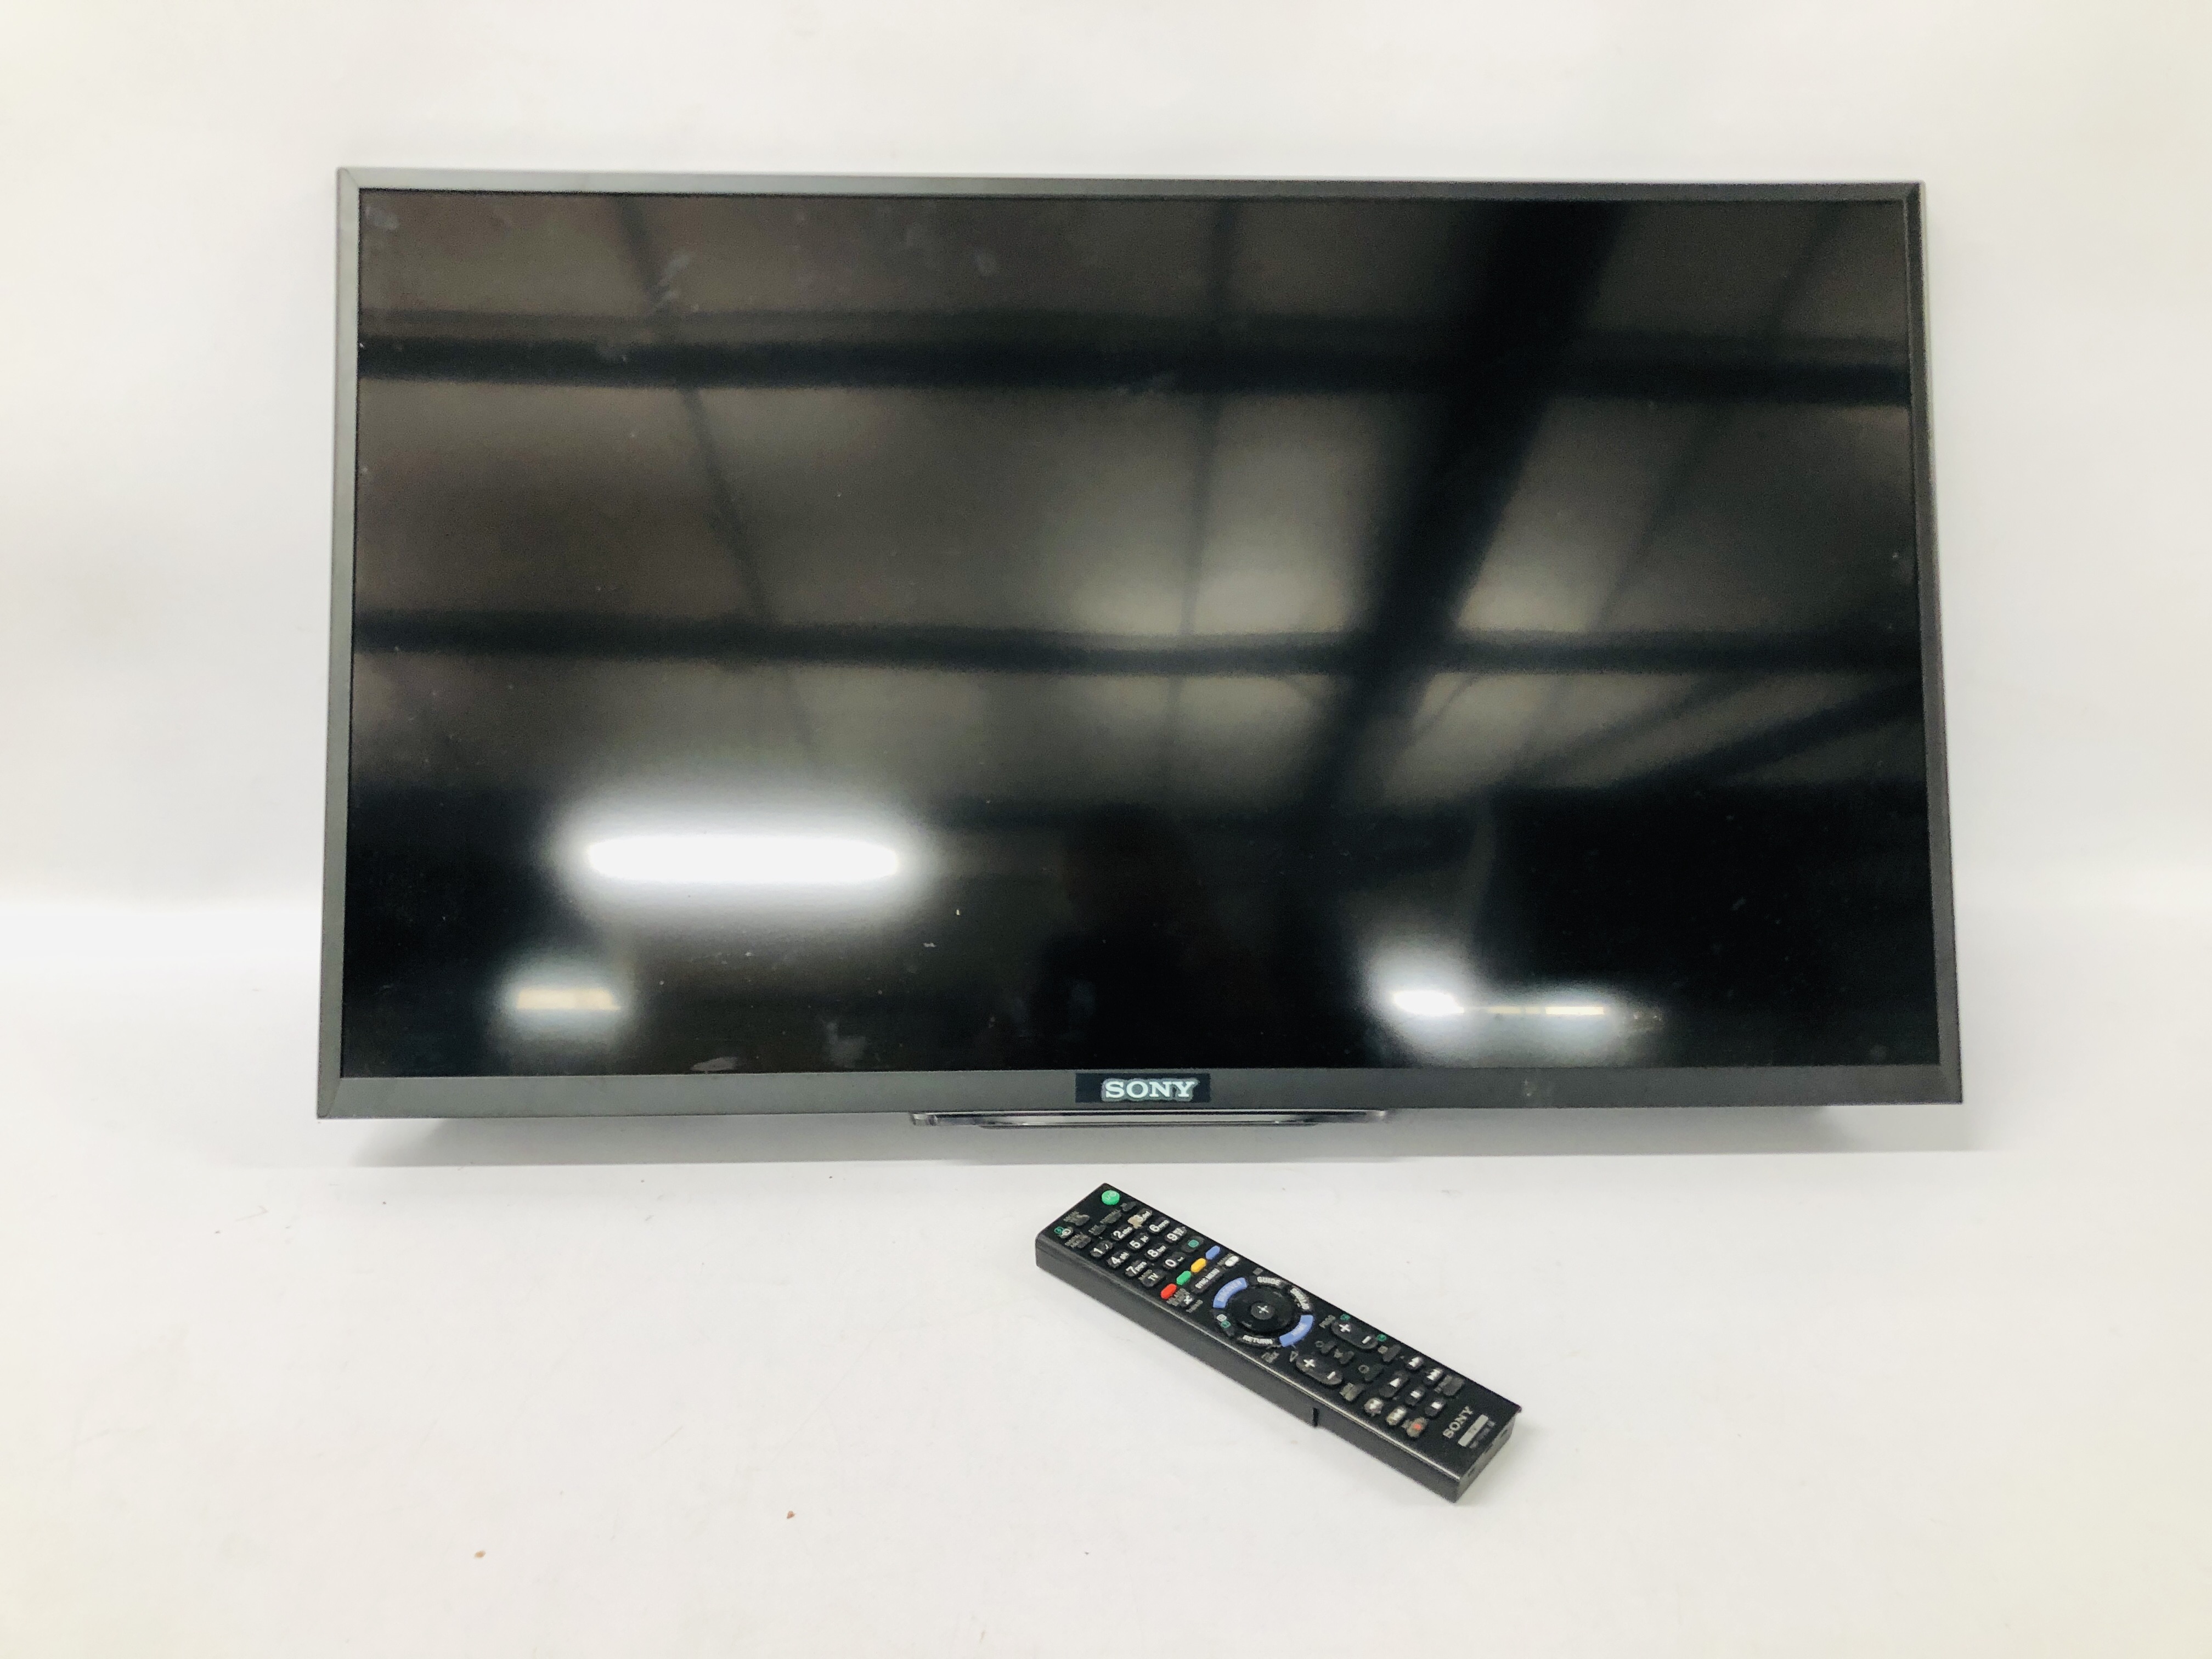 SONY 32 INCH TELEVISION MODEL KDL-32W705B WITH REMOTE CONTROL - SOLD AS SEEN